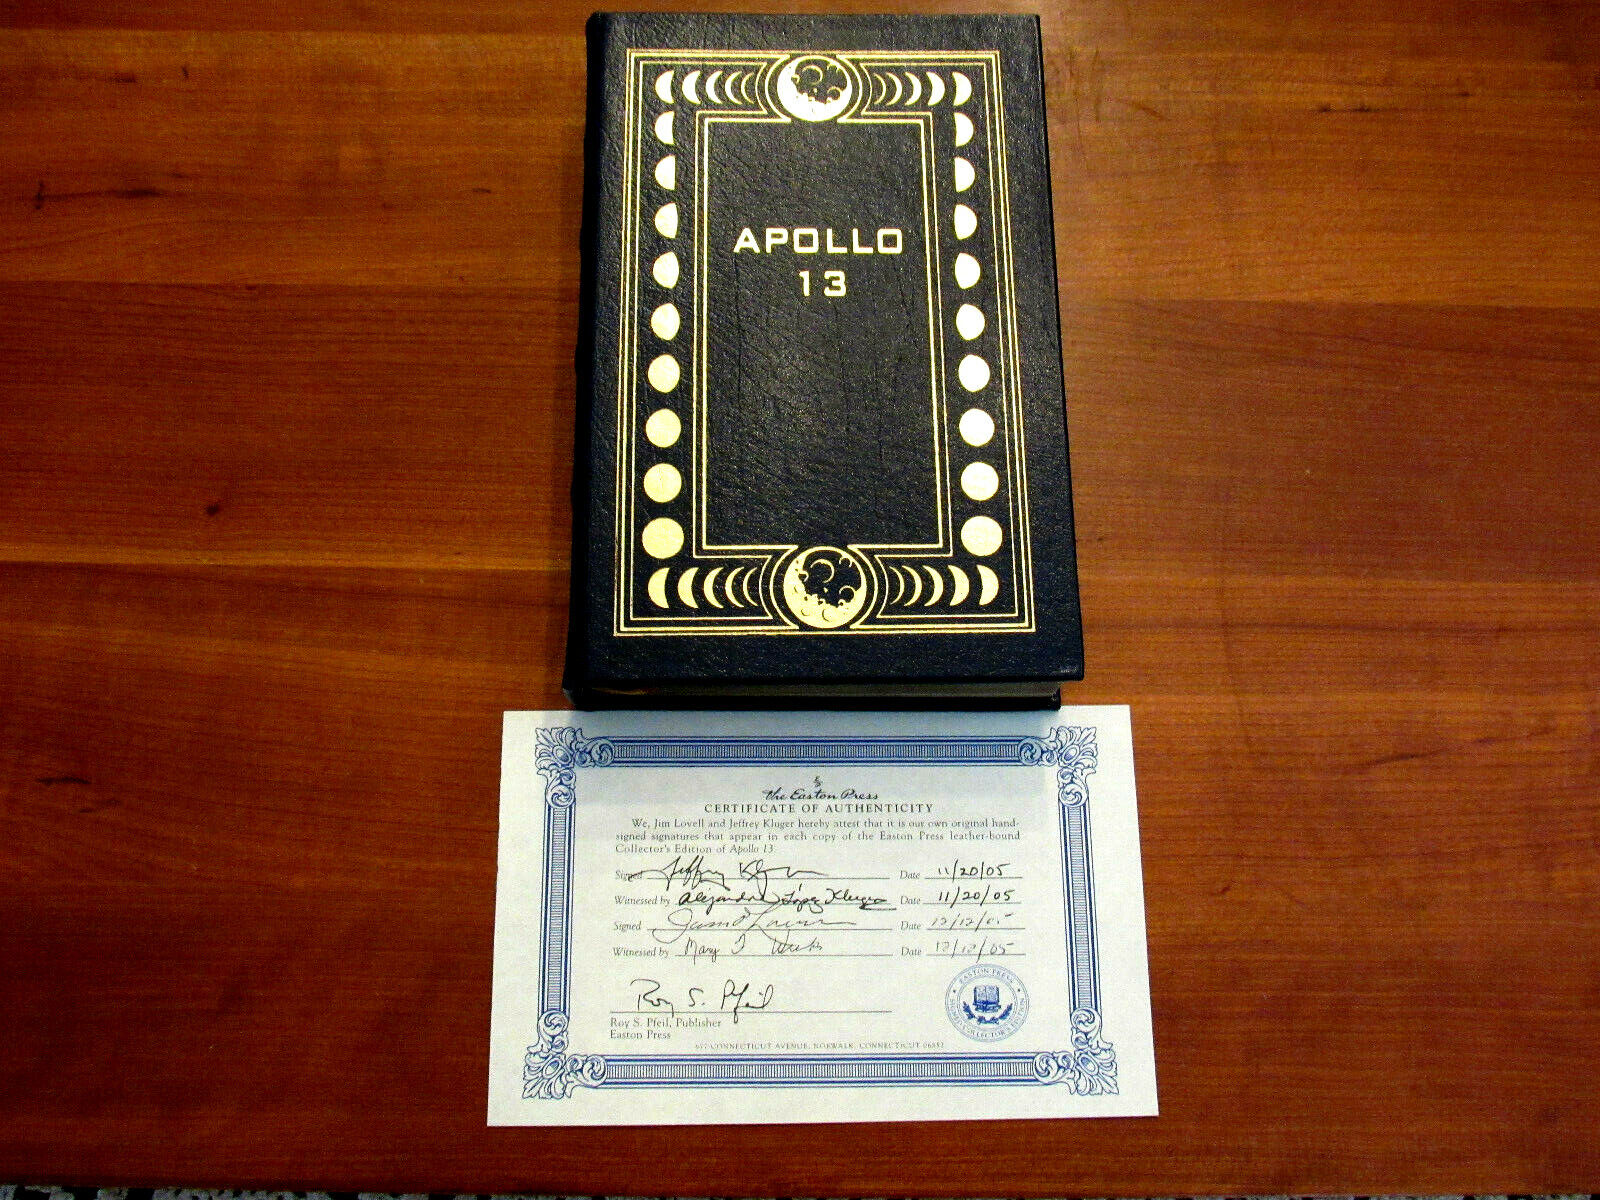 JAMES JIM LOVELL JEFFREY KLUGER APOLLO 13 SIGNED AUTO COLLECTORS LEATHER BOOK  